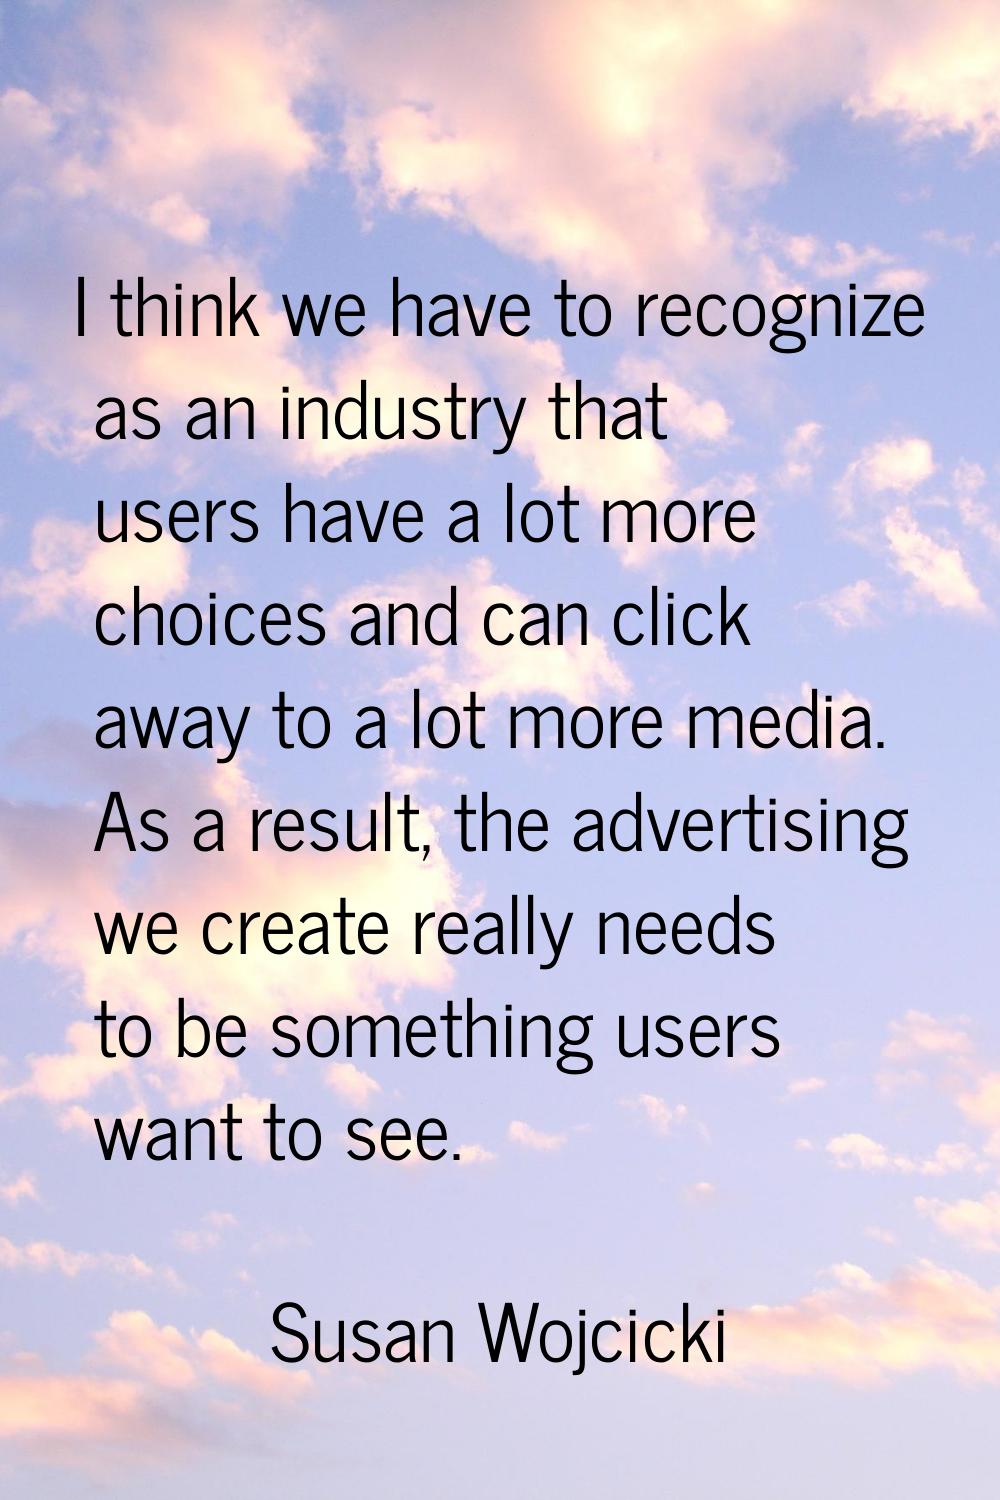 I think we have to recognize as an industry that users have a lot more choices and can click away t